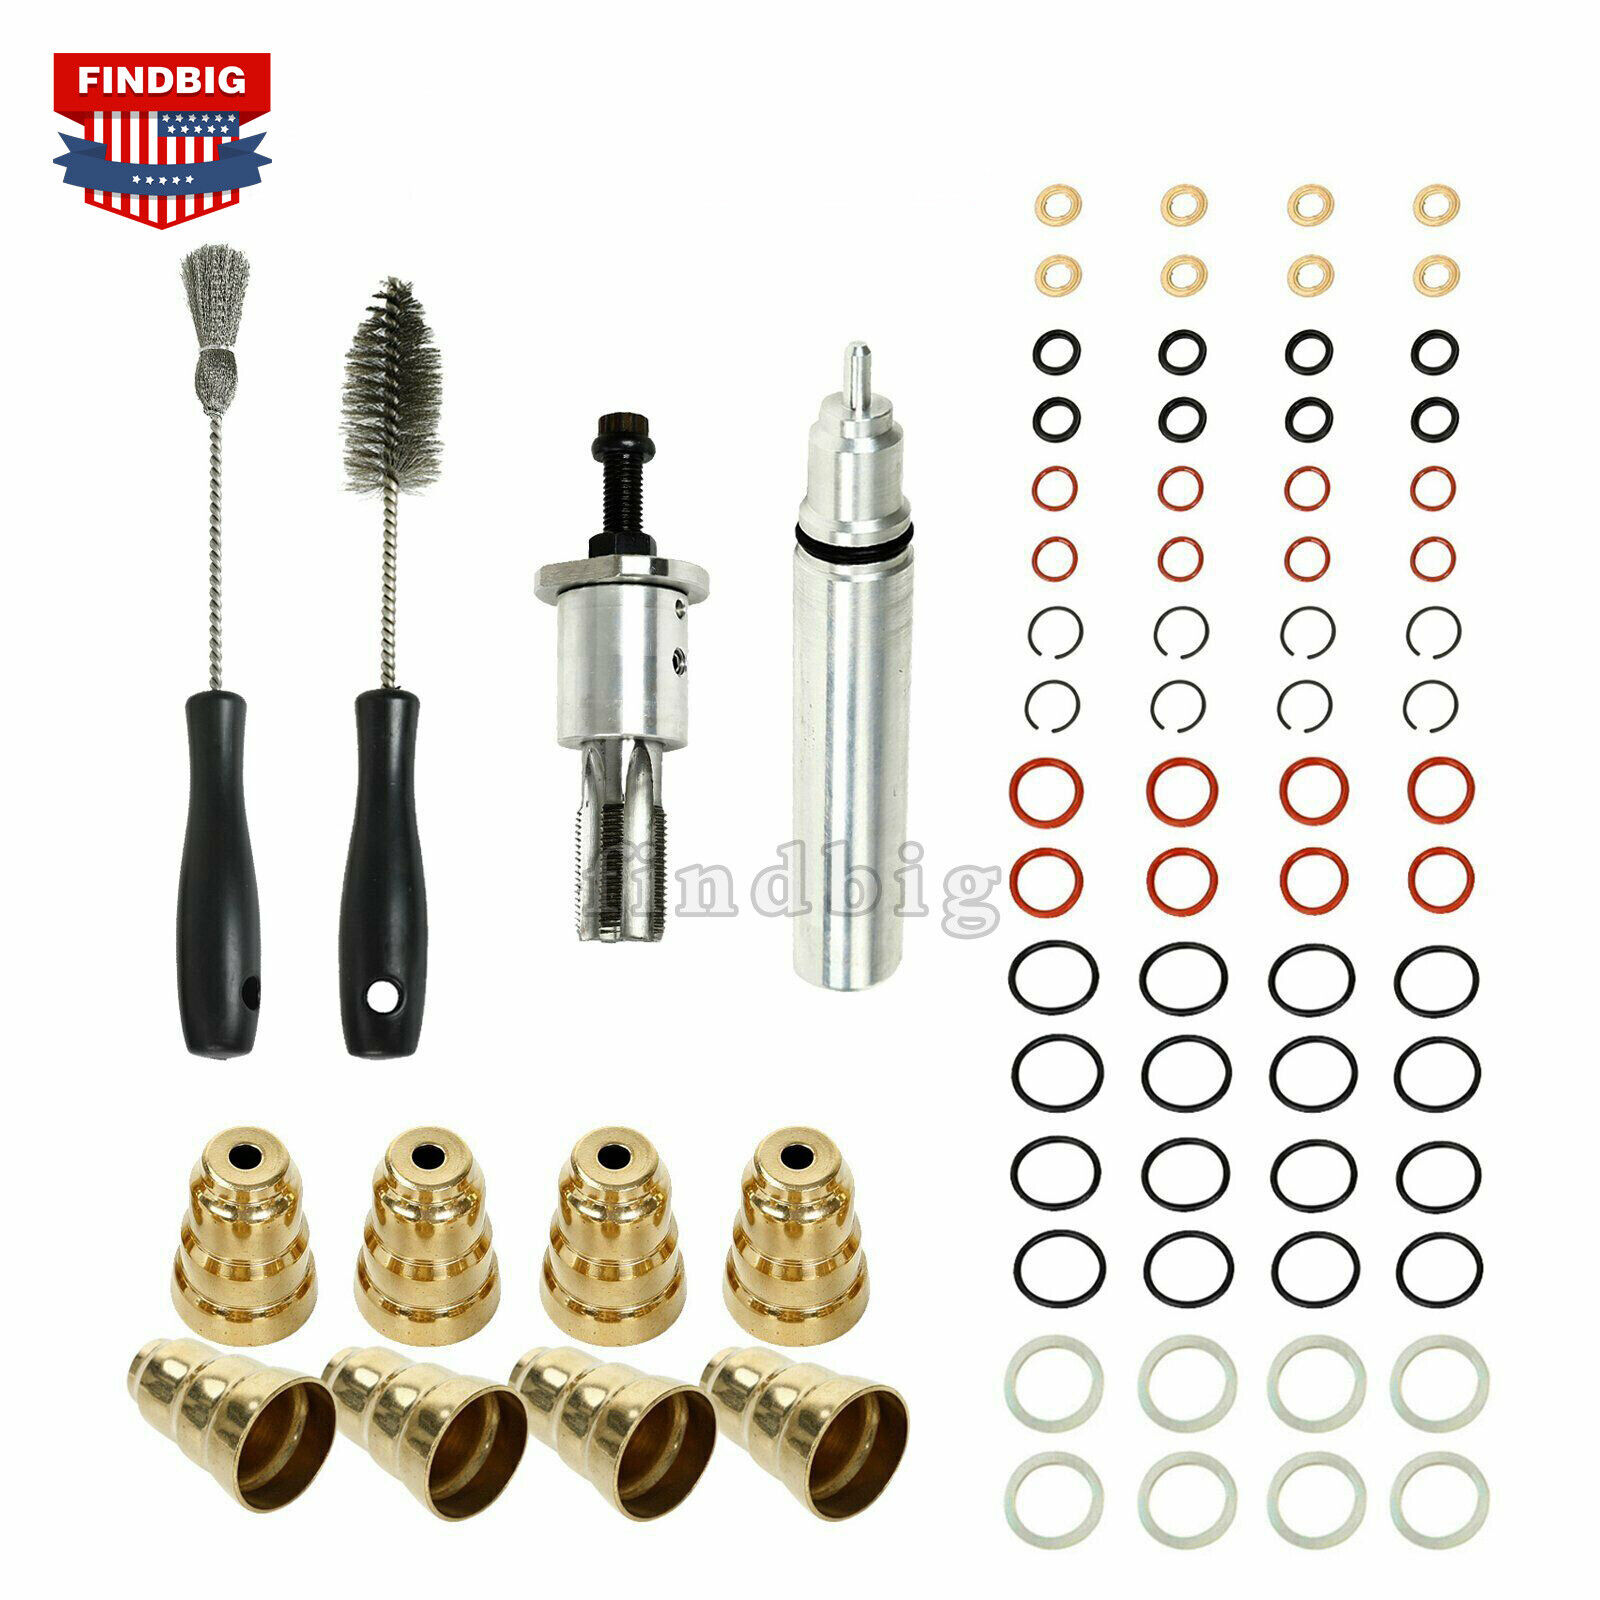 Injector Sleeve Cup Removal Tool & Install Kit+Brushes For 7.3L Ford Powerstroke